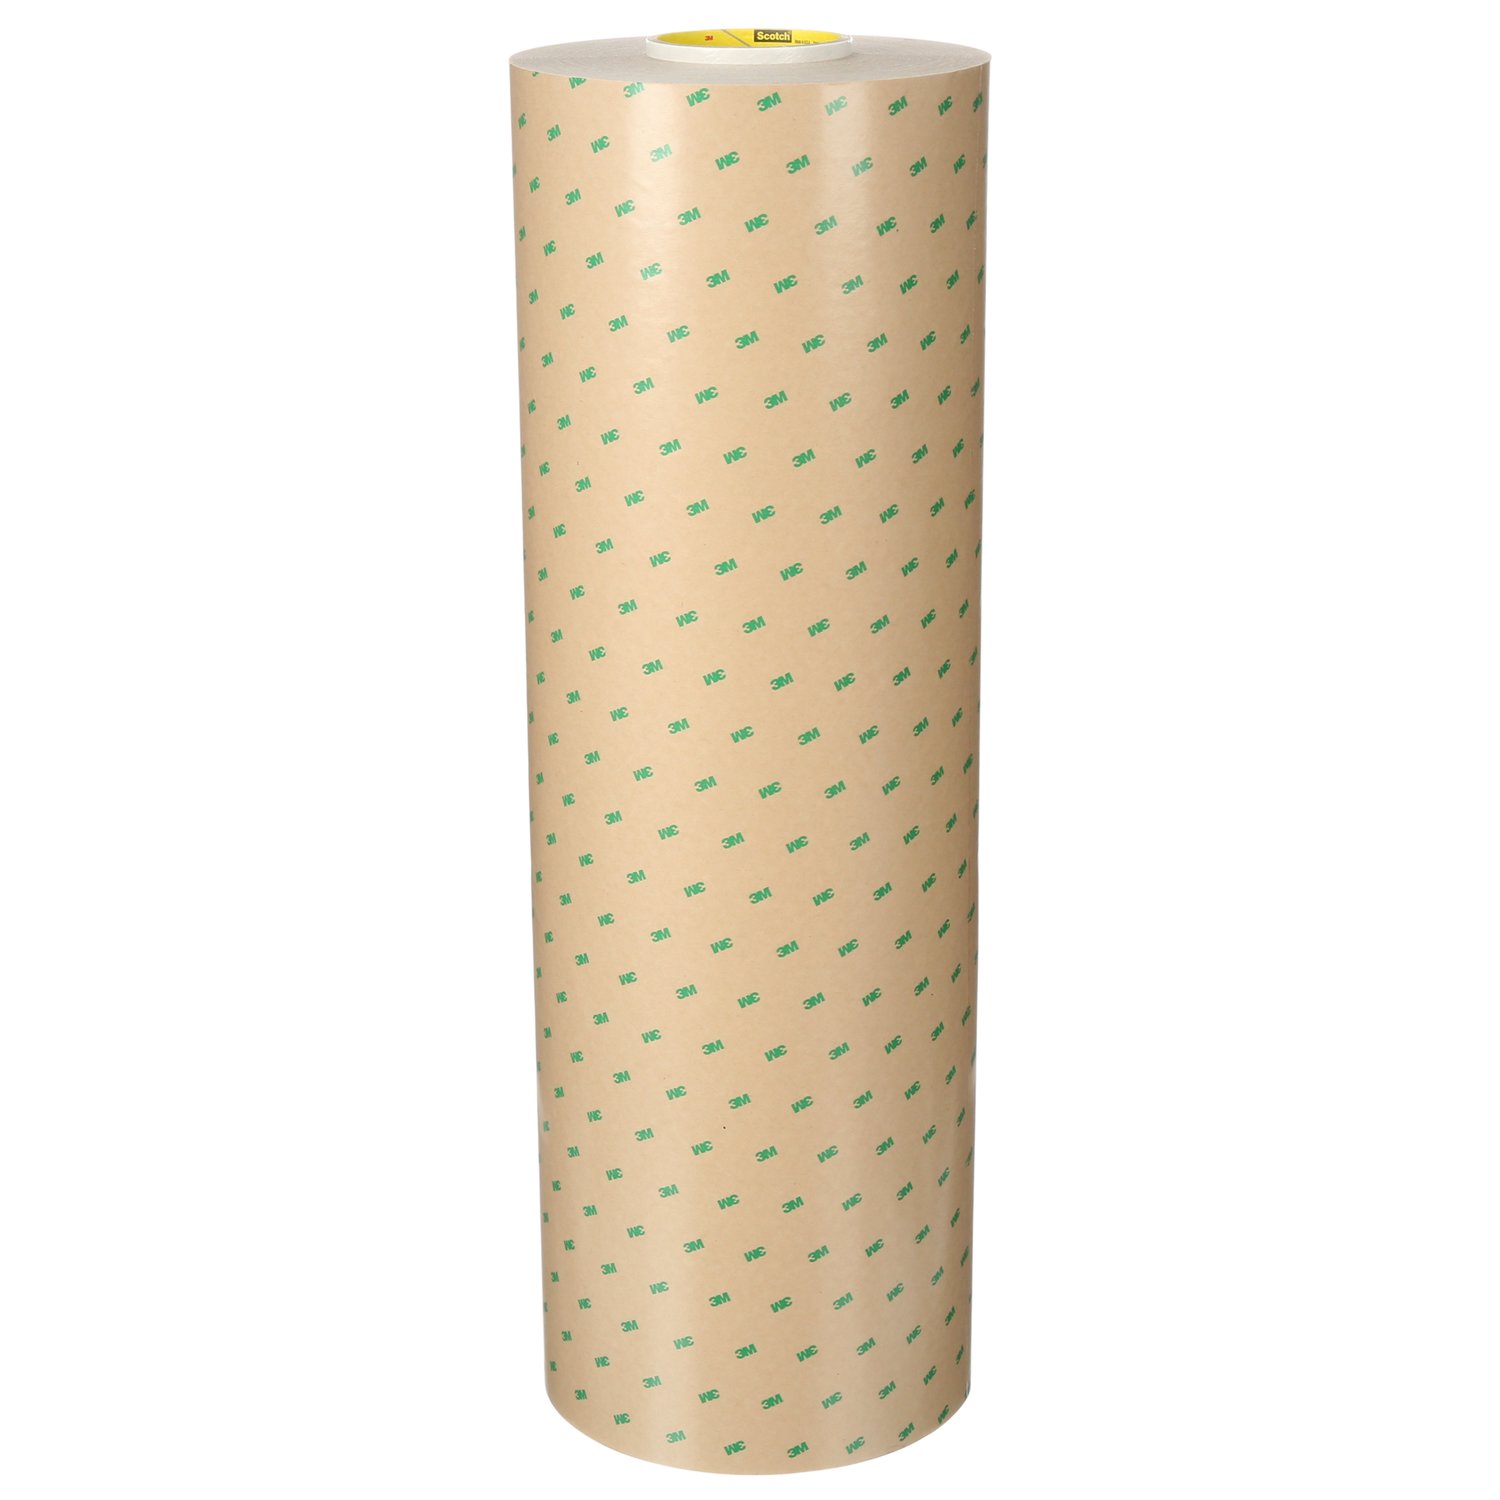 7000048894 - 3M Adhesive Transfer Tape 9502, Clear, 48 in x 180 yd, 2 mil, 1 roll
per case